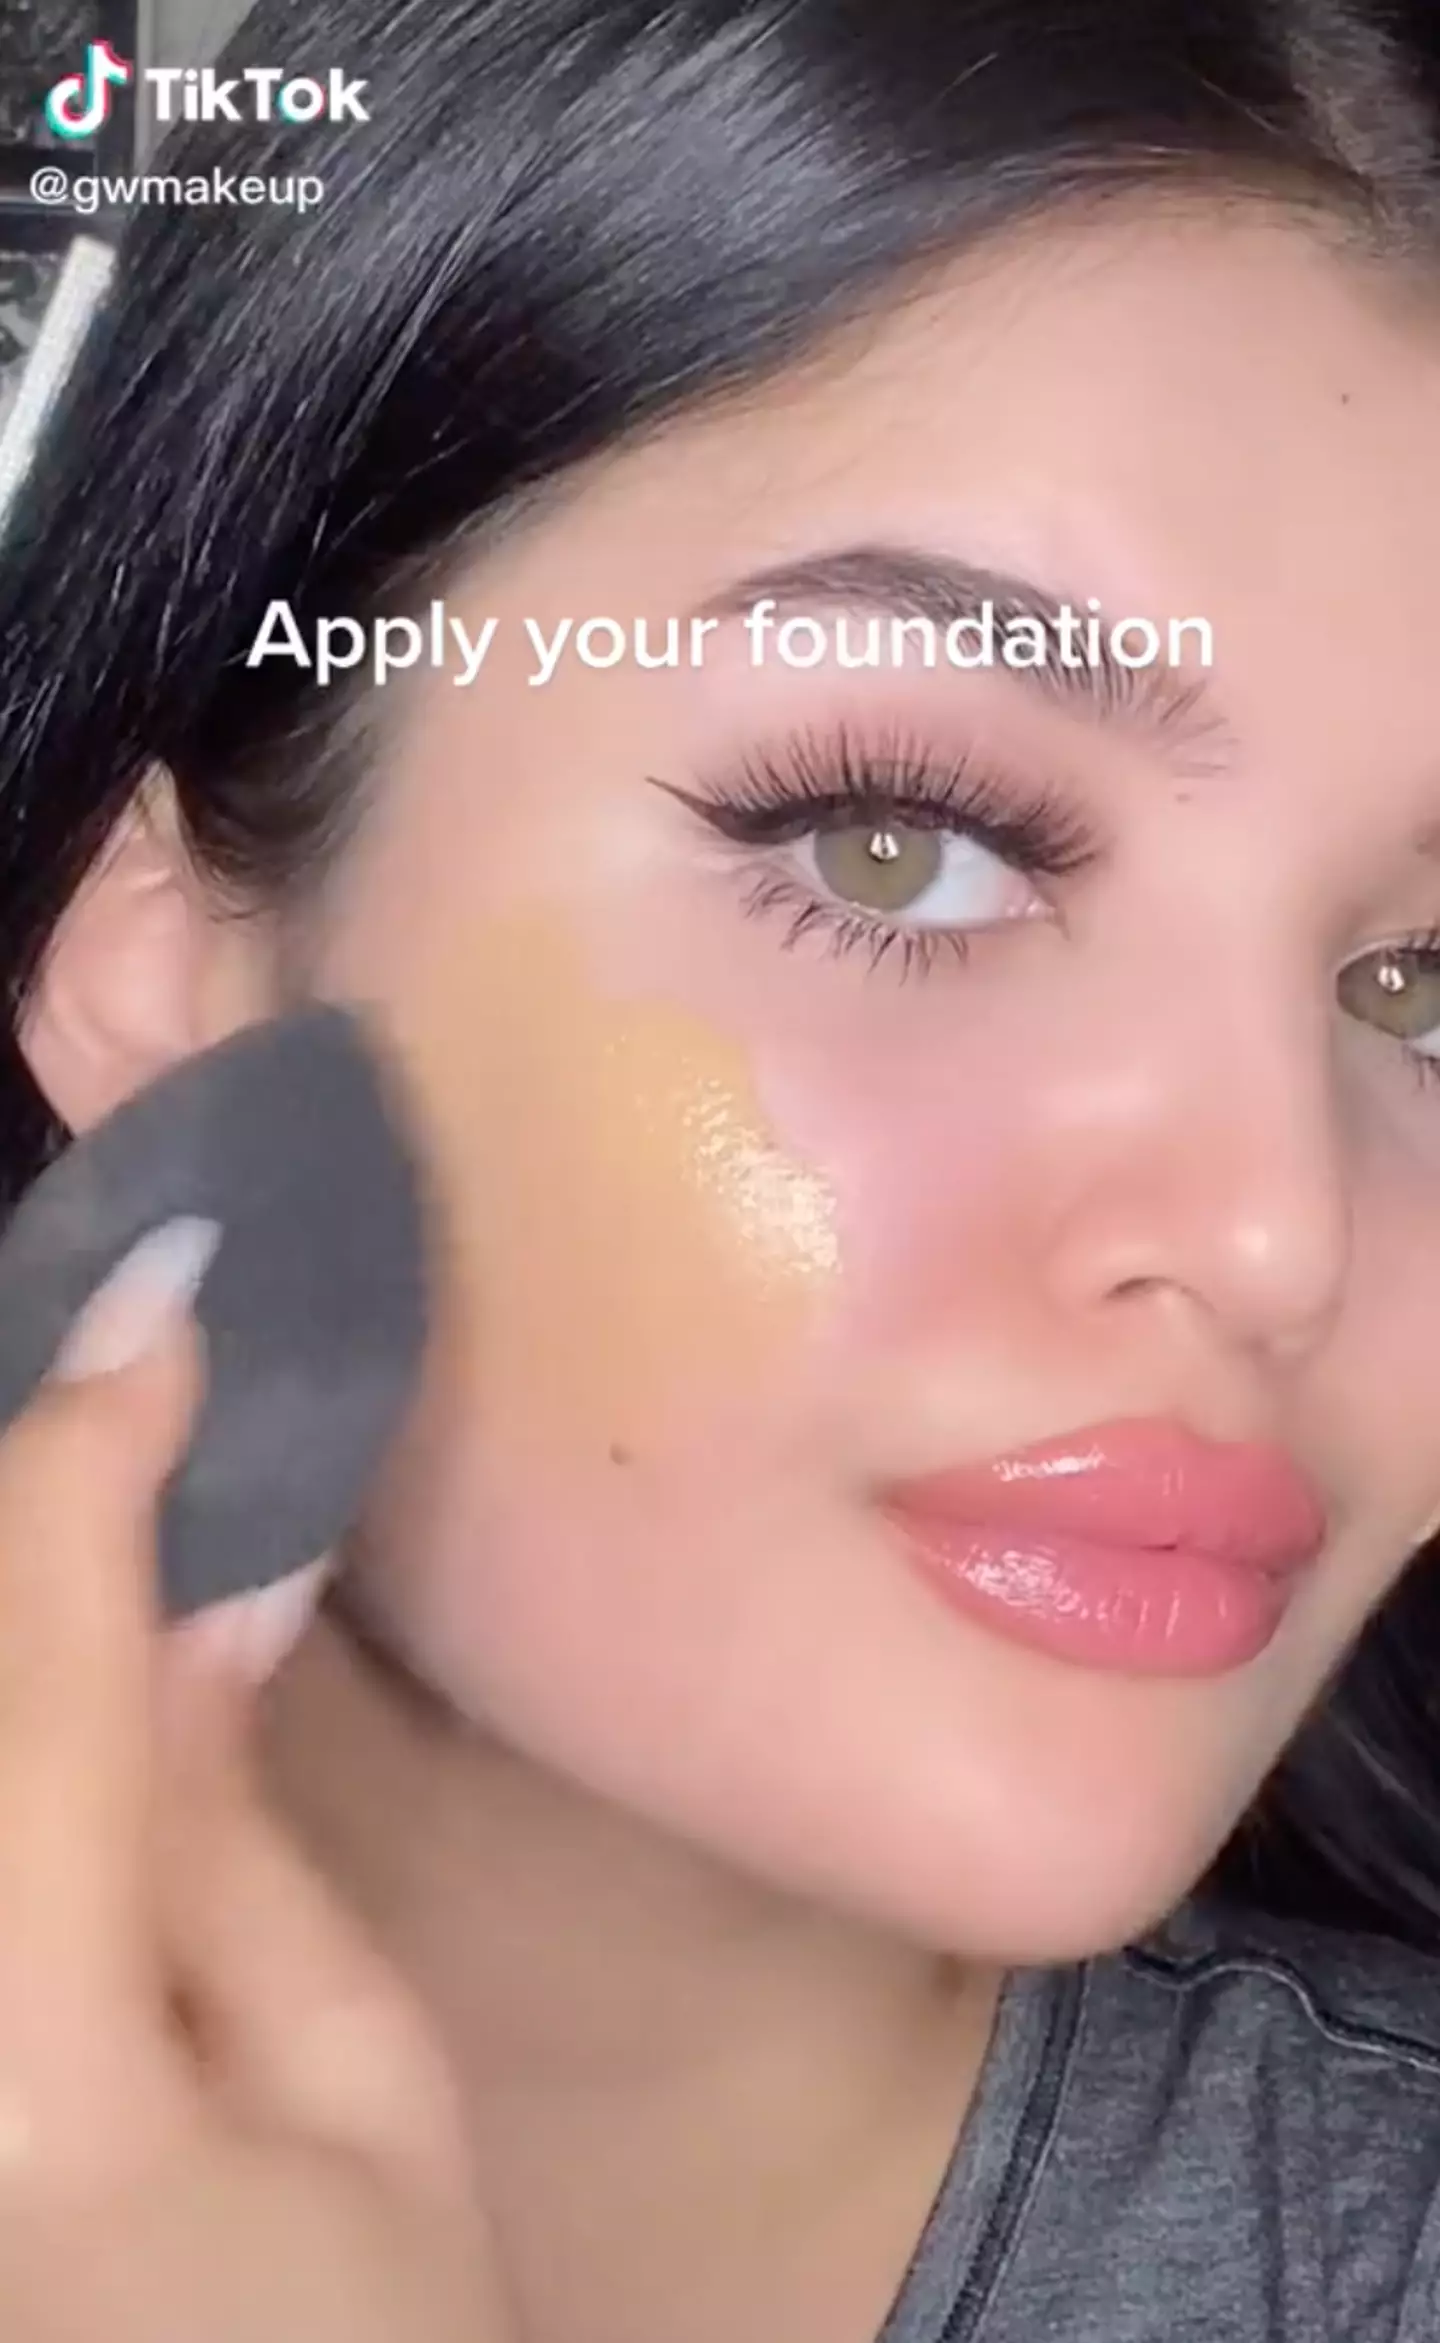 TikTok users swear it makes their skin look smoother (